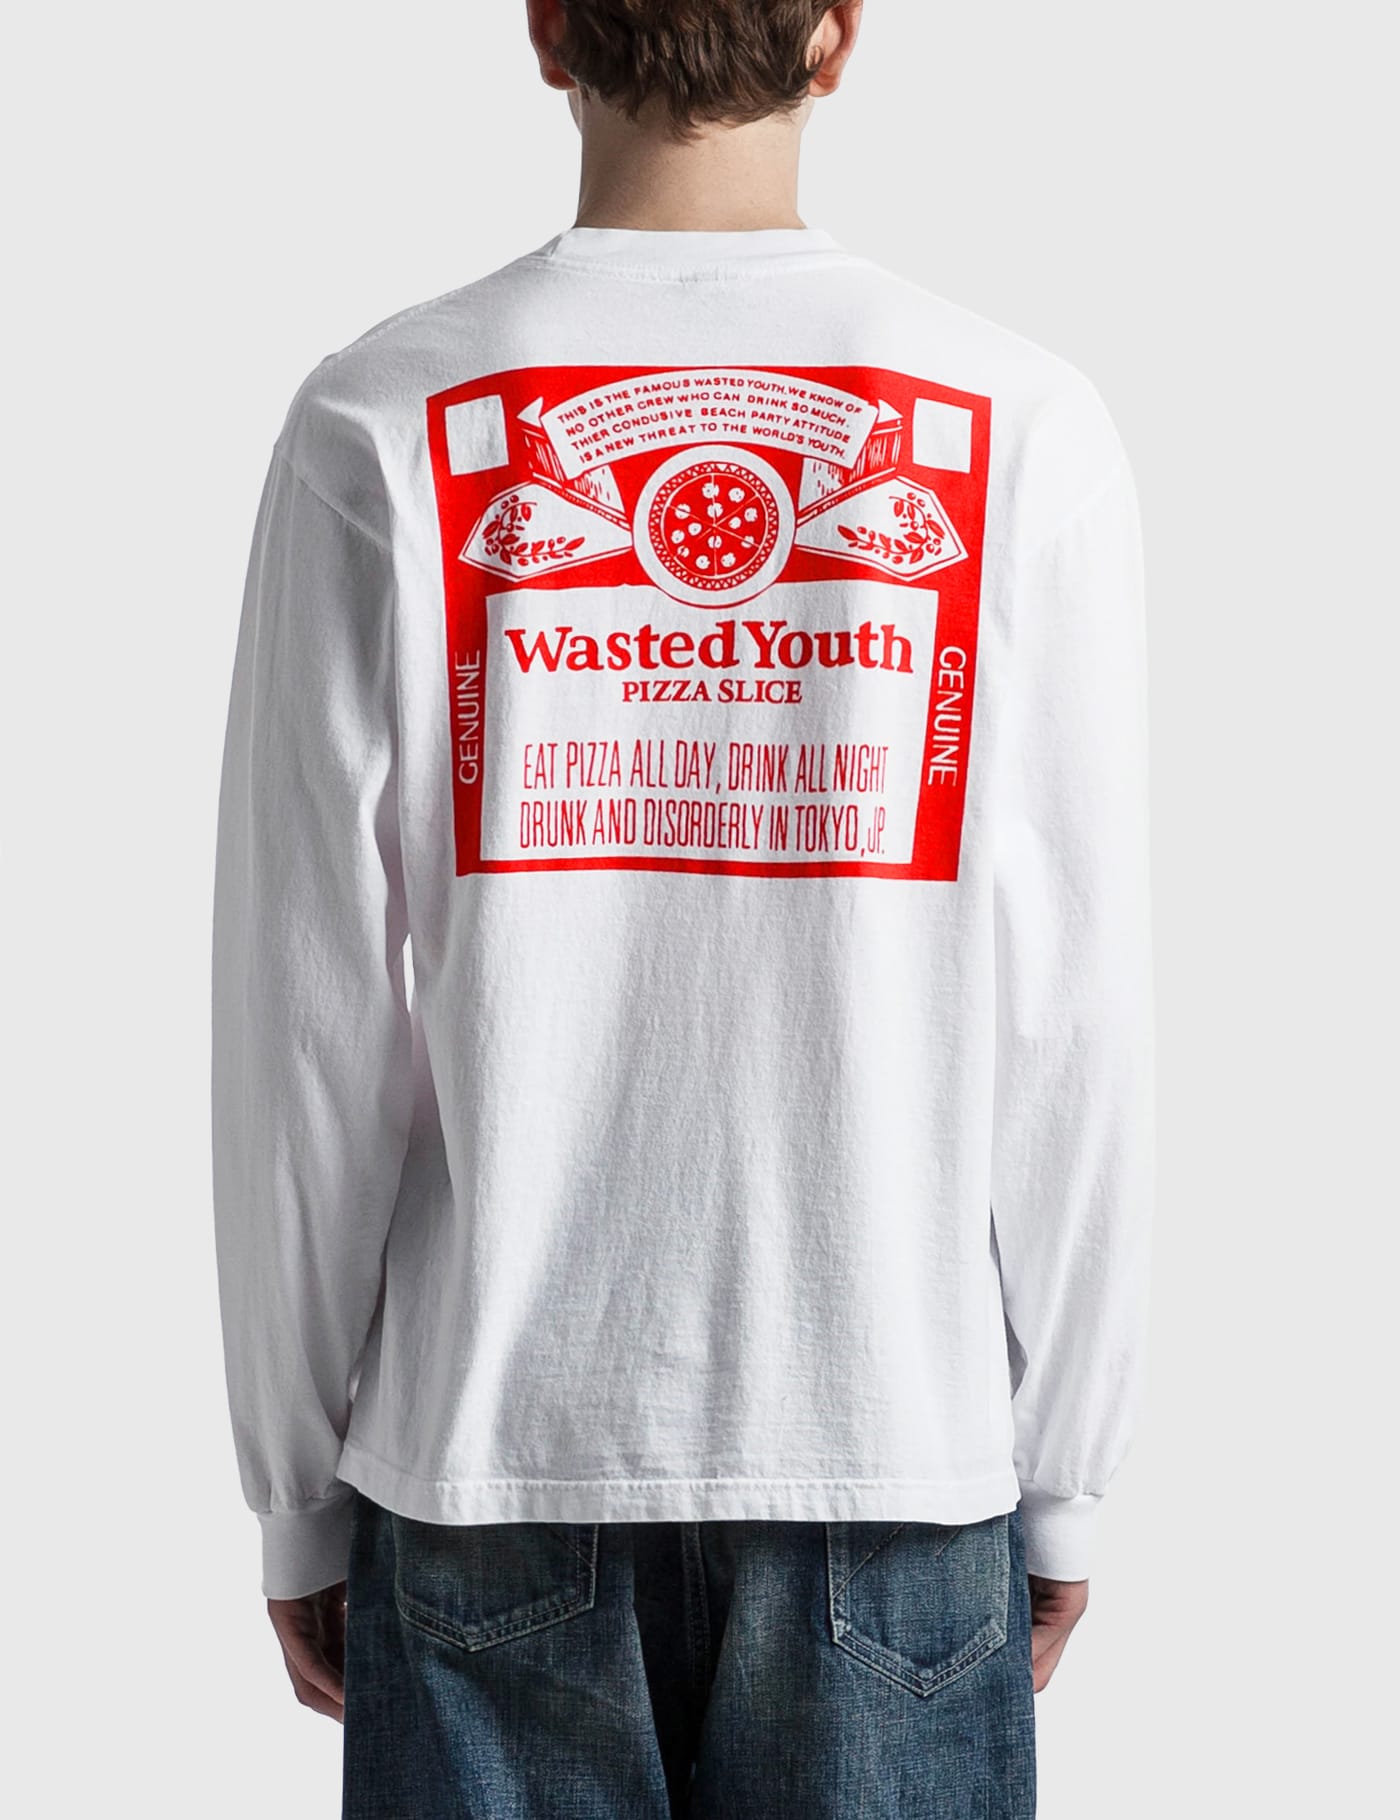 Wasted Youth - Wasted Youth x Pizza Slice Long Sleeve T-shirt